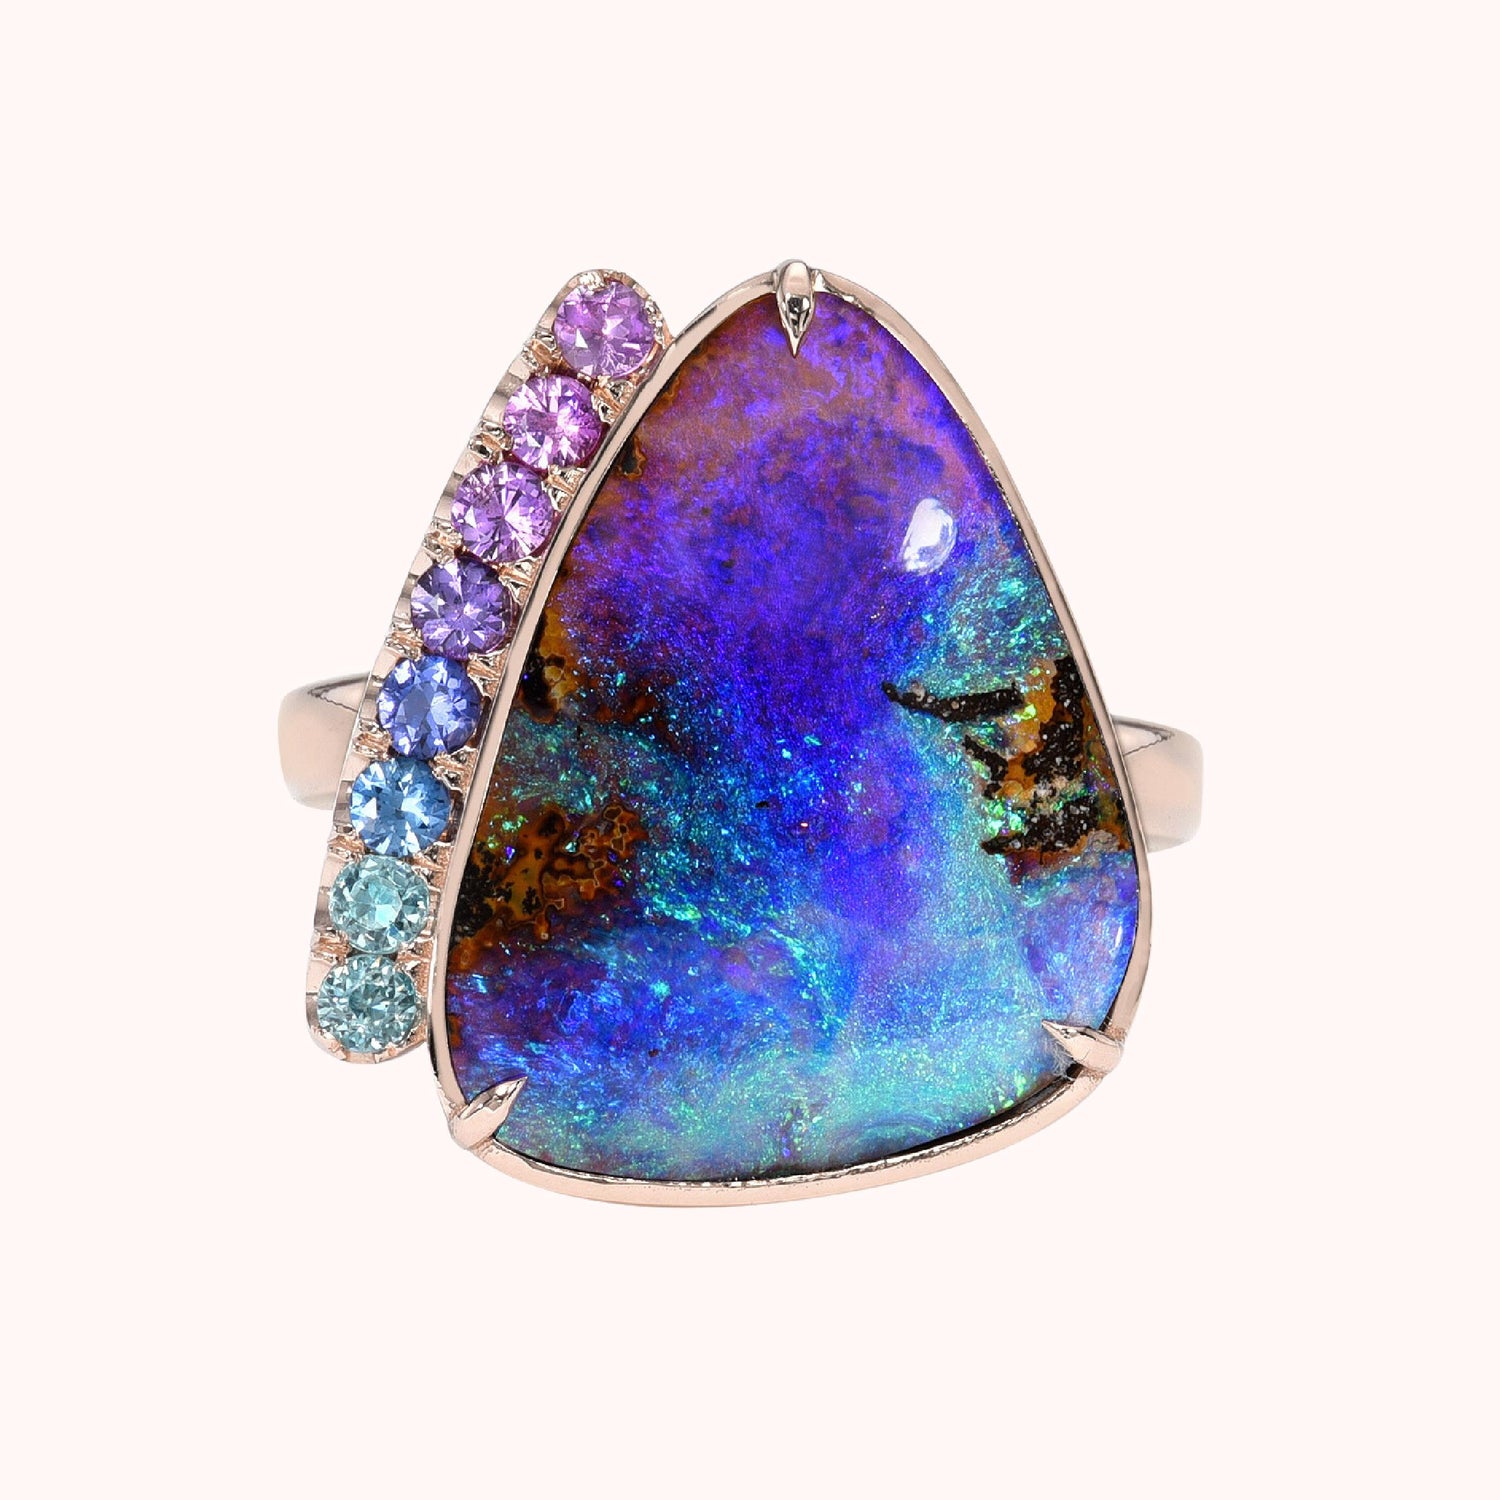 An Australian Opal Ring by NIXIN Jewelry. The rose gold opal ring has a Boulder Opal and purple sapphires.. 